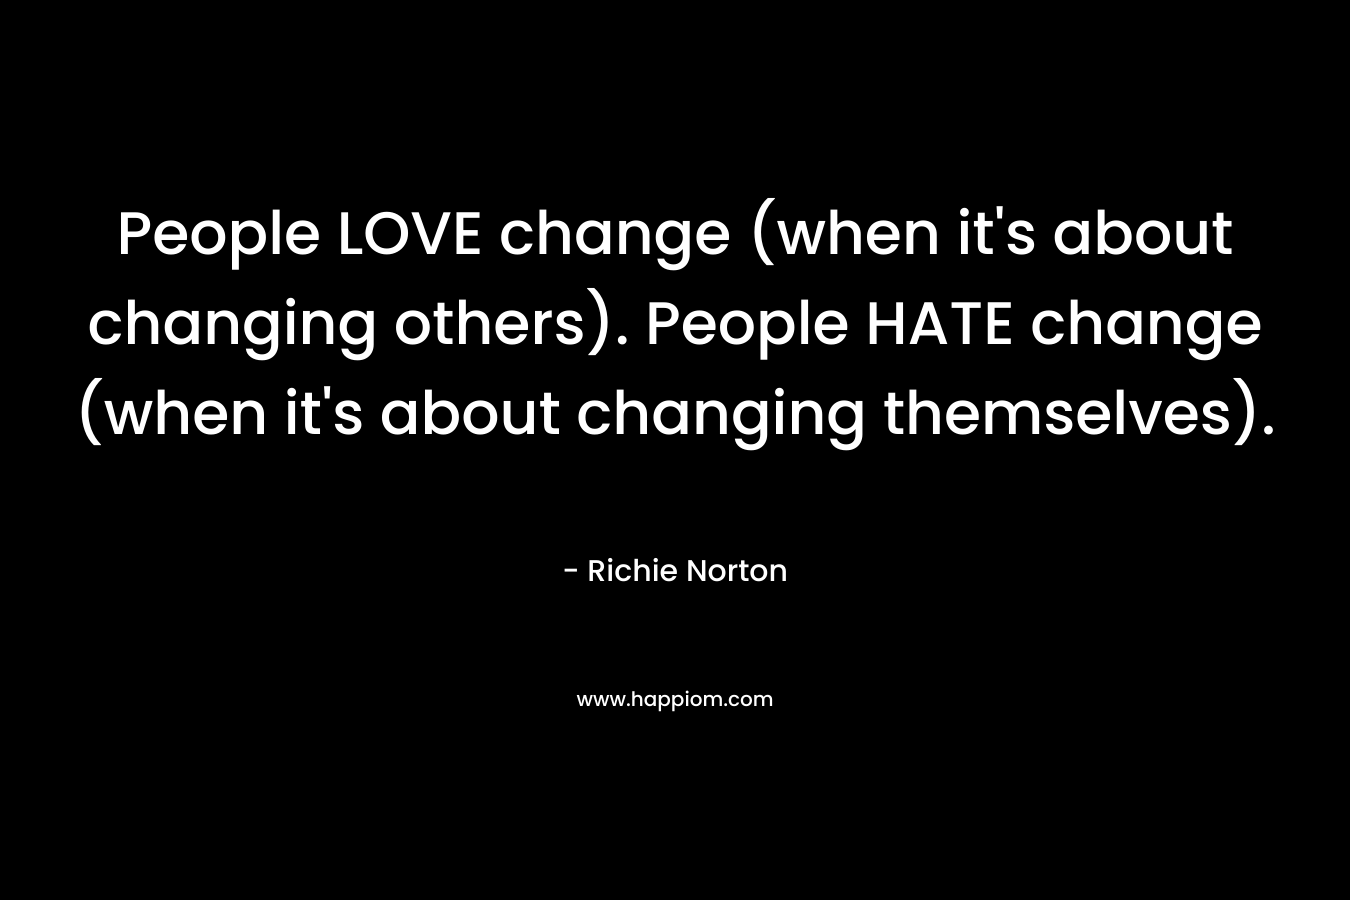 People LOVE change (when it's about changing others). People HATE change (when it's about changing themselves).